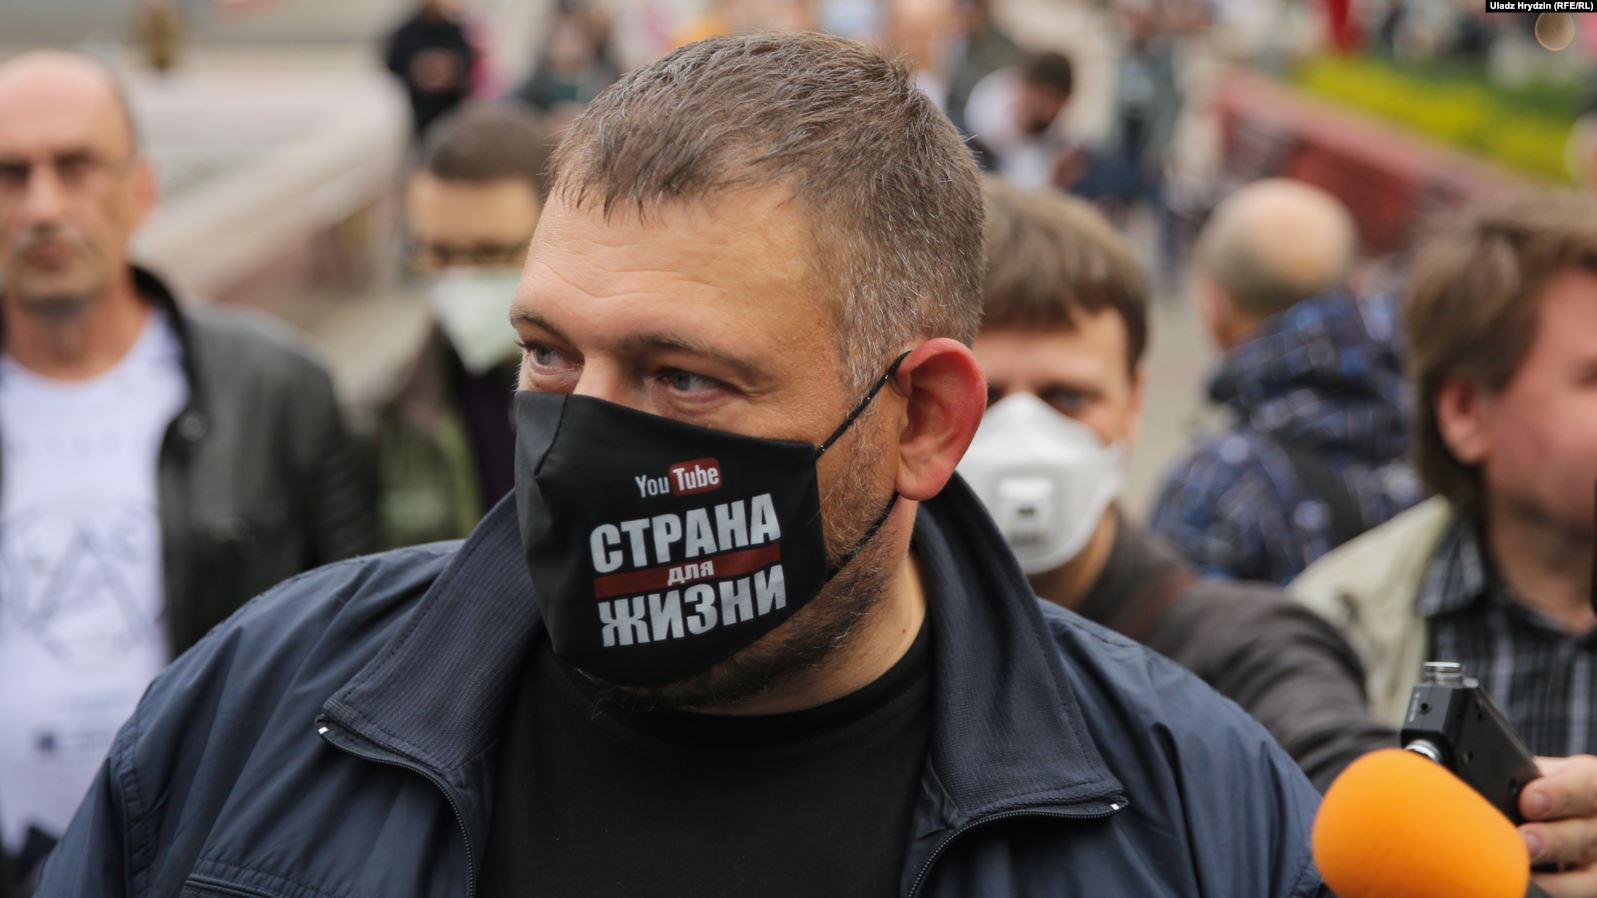 Belarusian blogger Syarhey Tsikhanouski has been in jail since May 29 for taking part in an unsanctioned political rally. Photo: Uladz Hrydzin (RFE/RL)